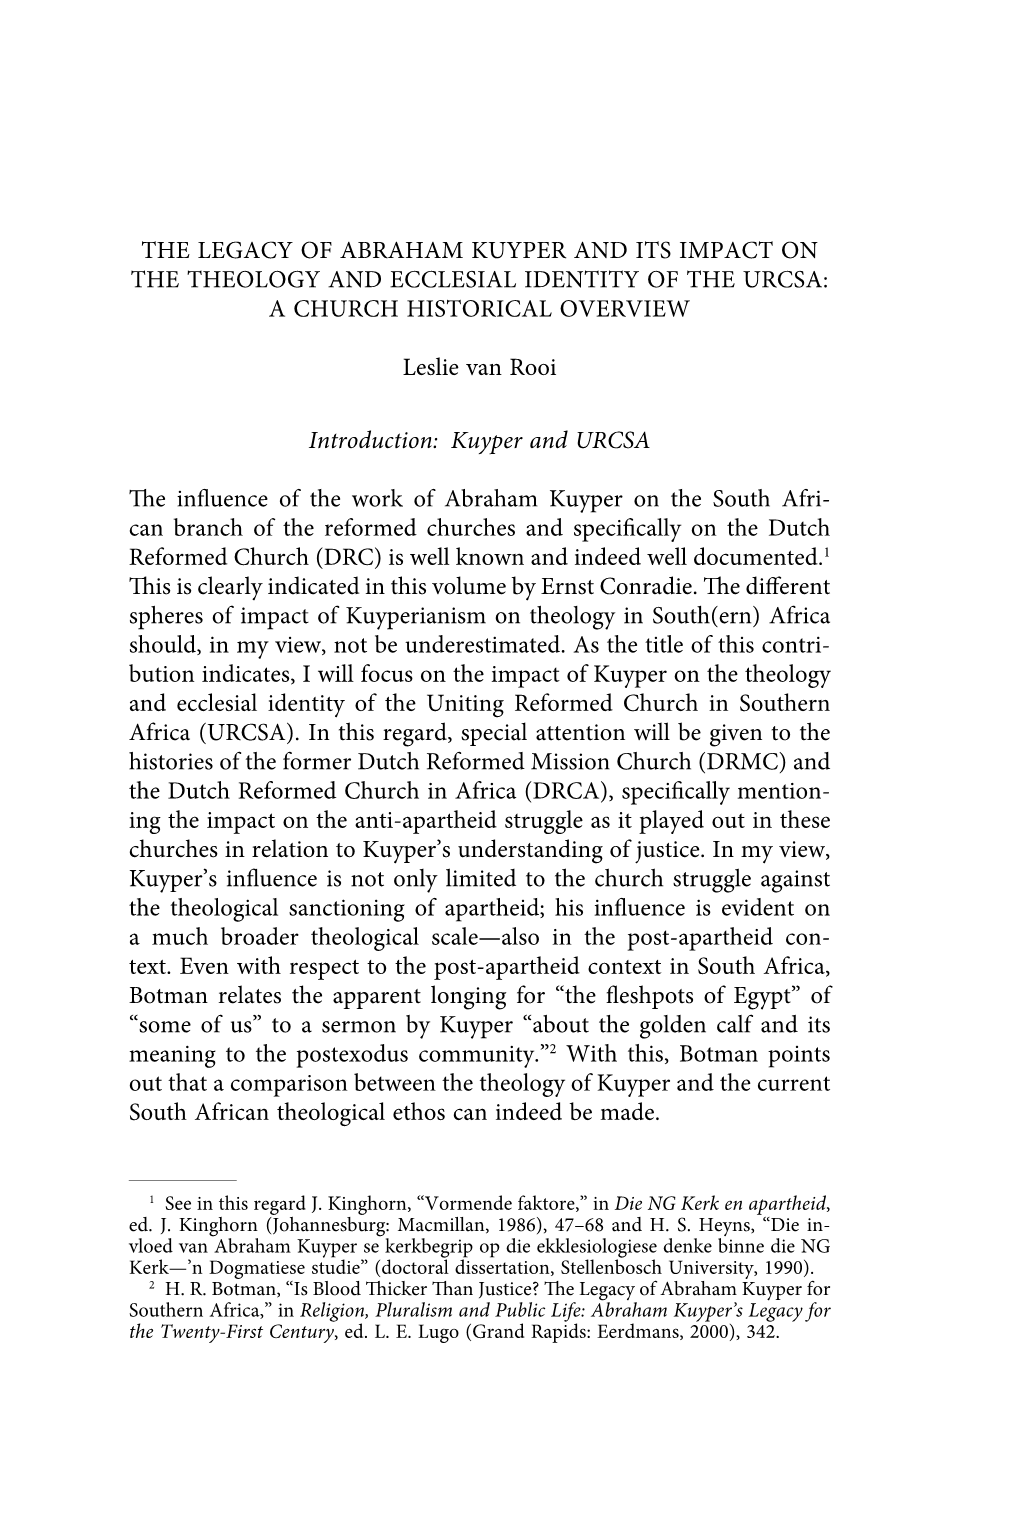 The Legacy of Abraham Kuyper and Its Impact on the Theology and Ecclesial Identity of the Urcsa: a Church Historical Overview